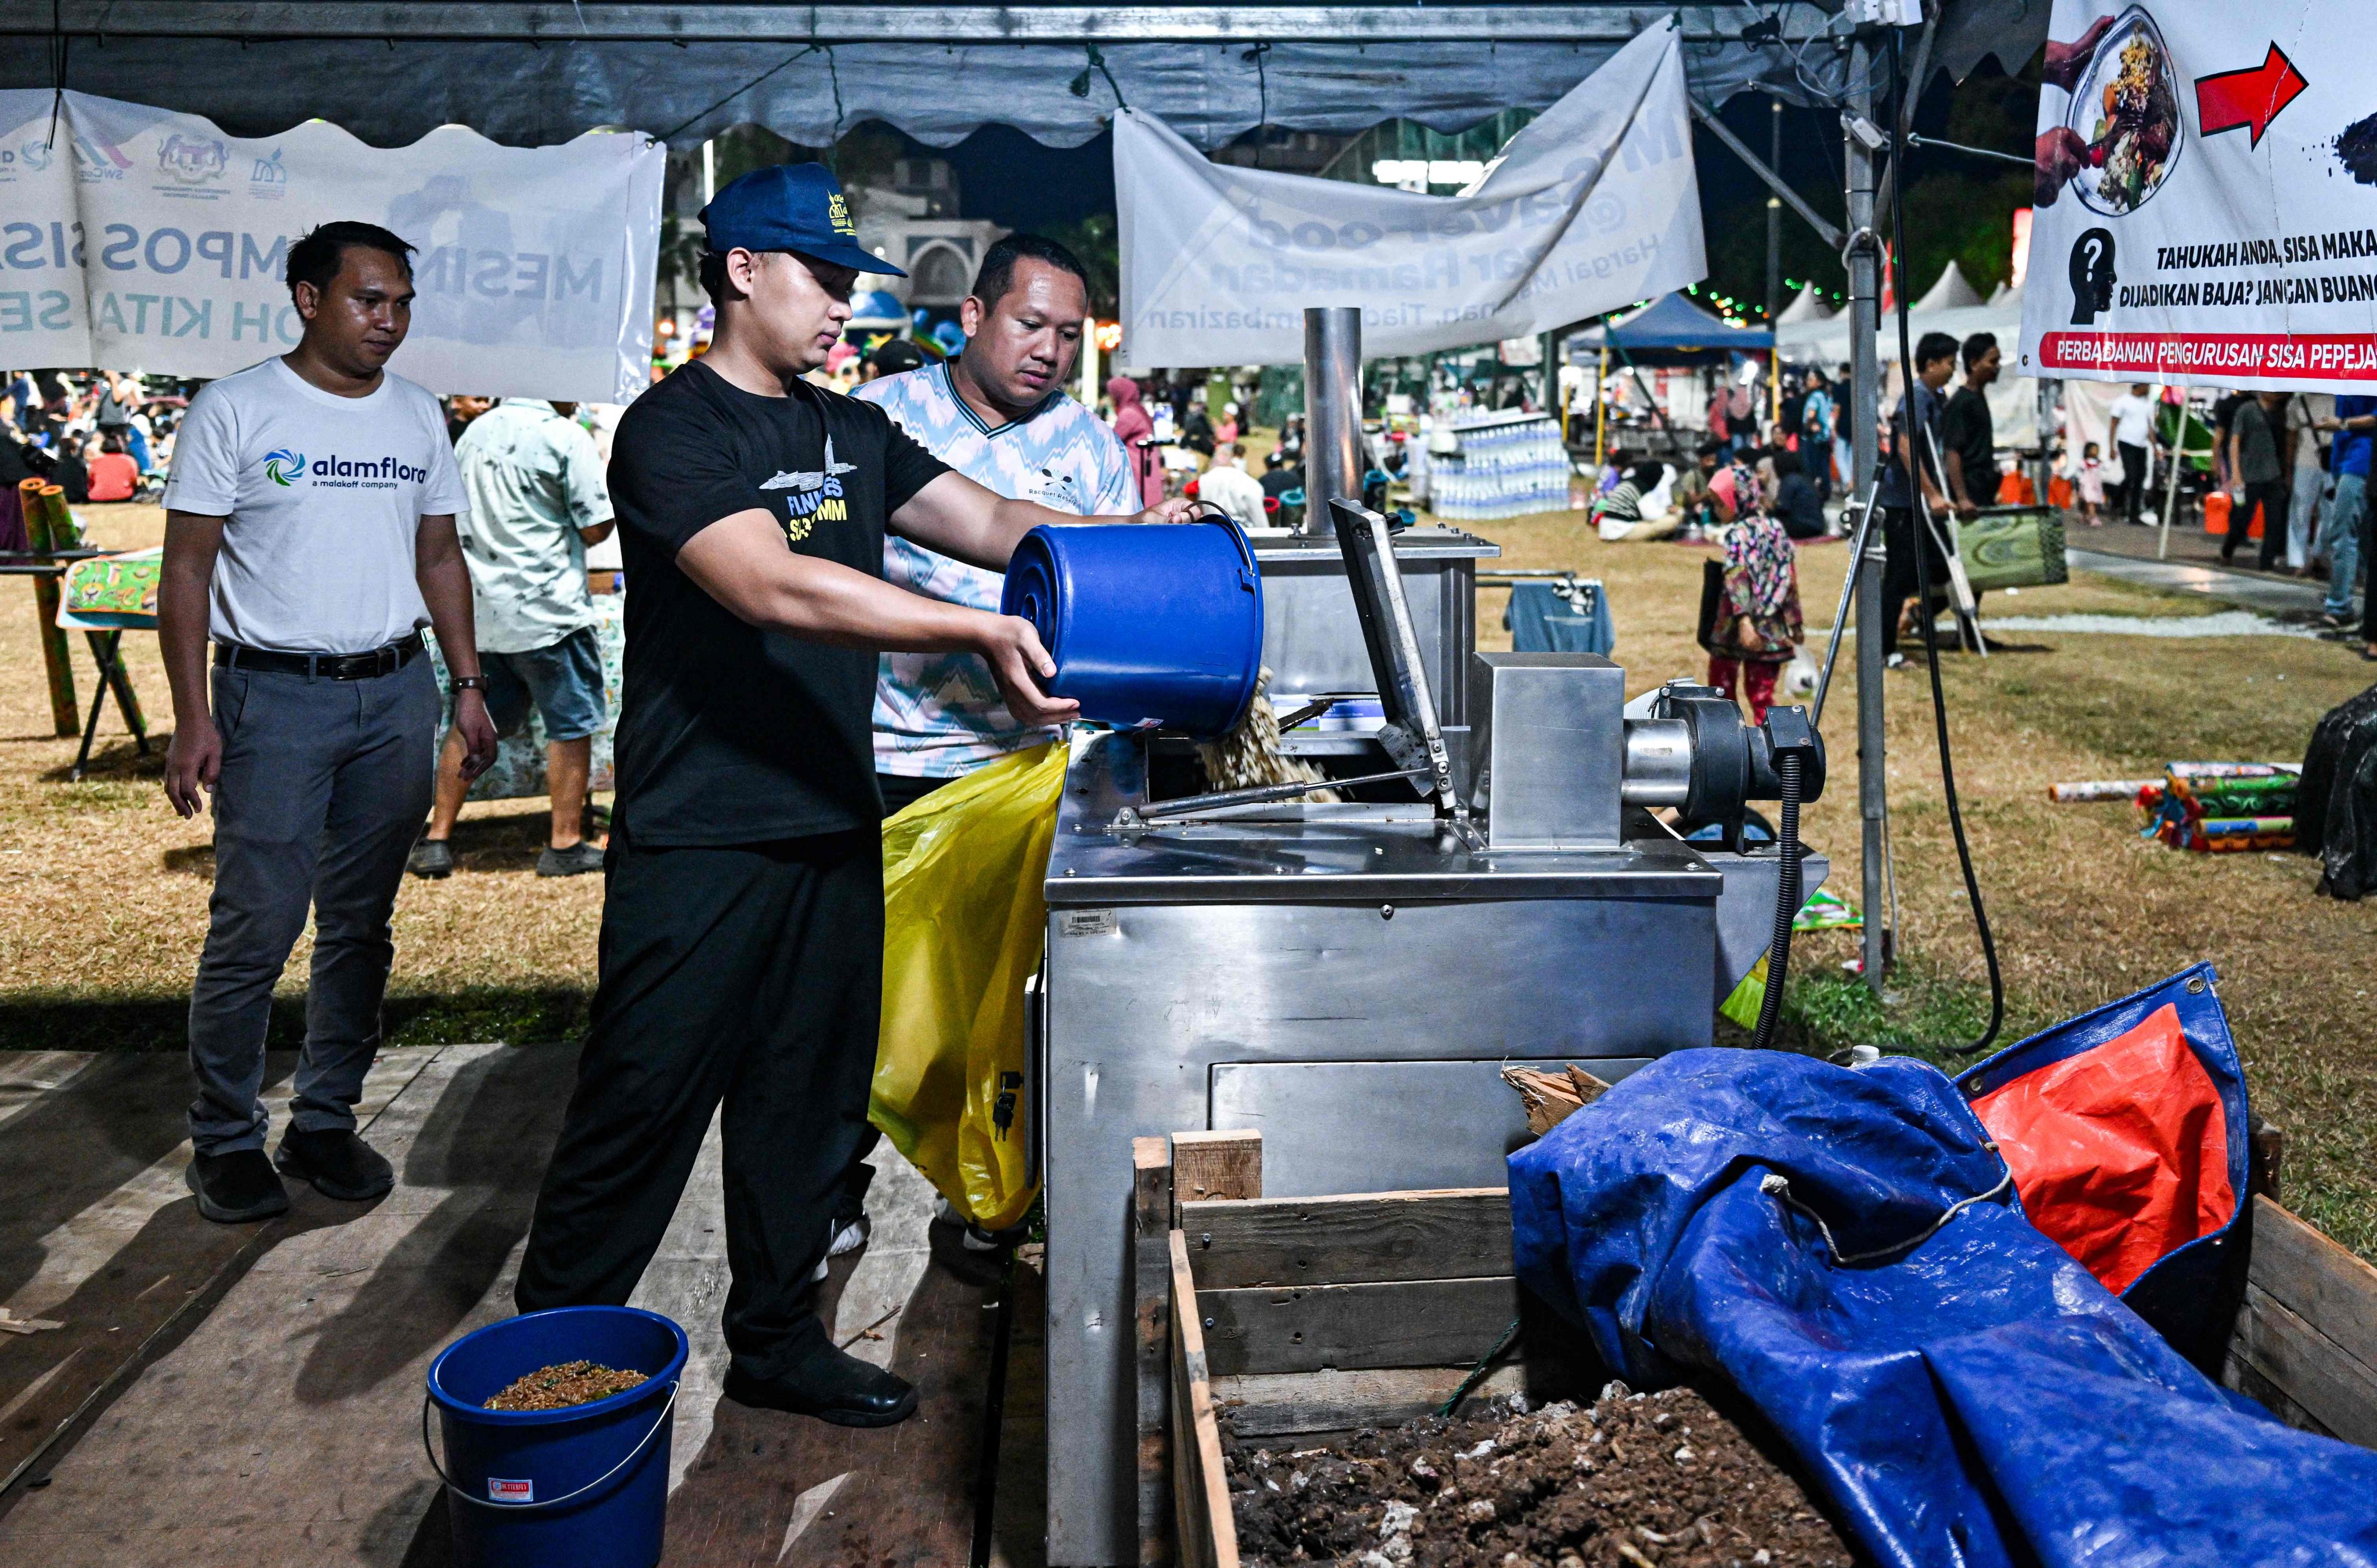 A Ramadan bazaar trader throws food waste into a composting machine in Kuantan, in Malaysia’s Pahang state, on April 3. After breaking their Ramadan fast, people throw their leftovers into a machine that converts the food scraps into organic fertiliser for crops as part of a Pahang government initiative to reduce food waste. Photo: AFP